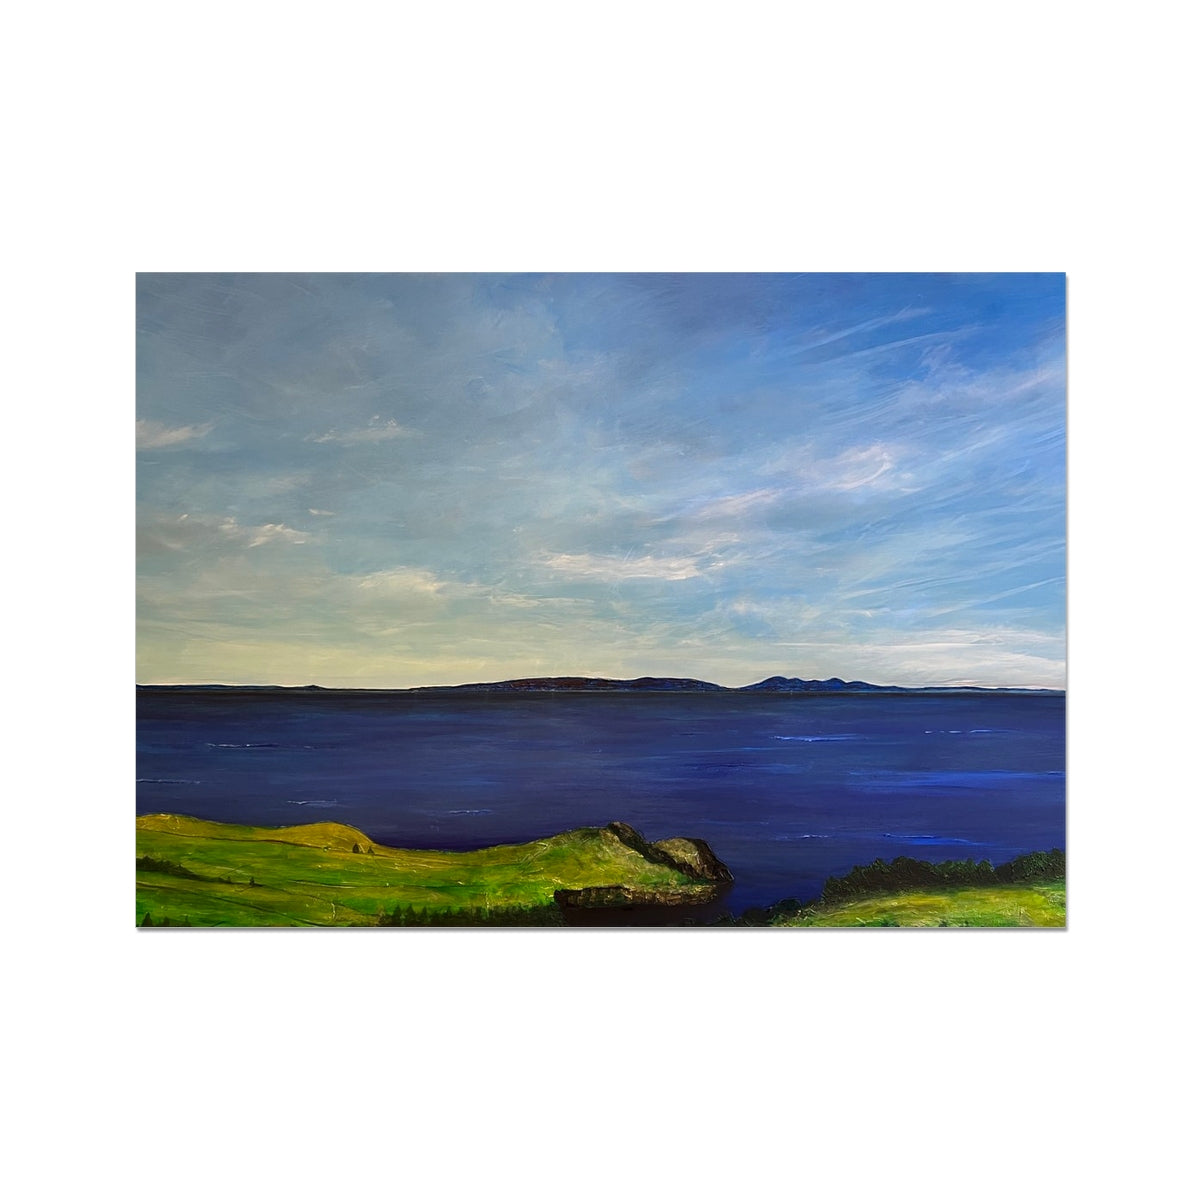 From Ireland To Scotland Painting | Fine Art Prints From Scotland-Unframed Prints-World Art Gallery-A2 Landscape-Paintings, Prints, Homeware, Art Gifts From Scotland By Scottish Artist Kevin Hunter